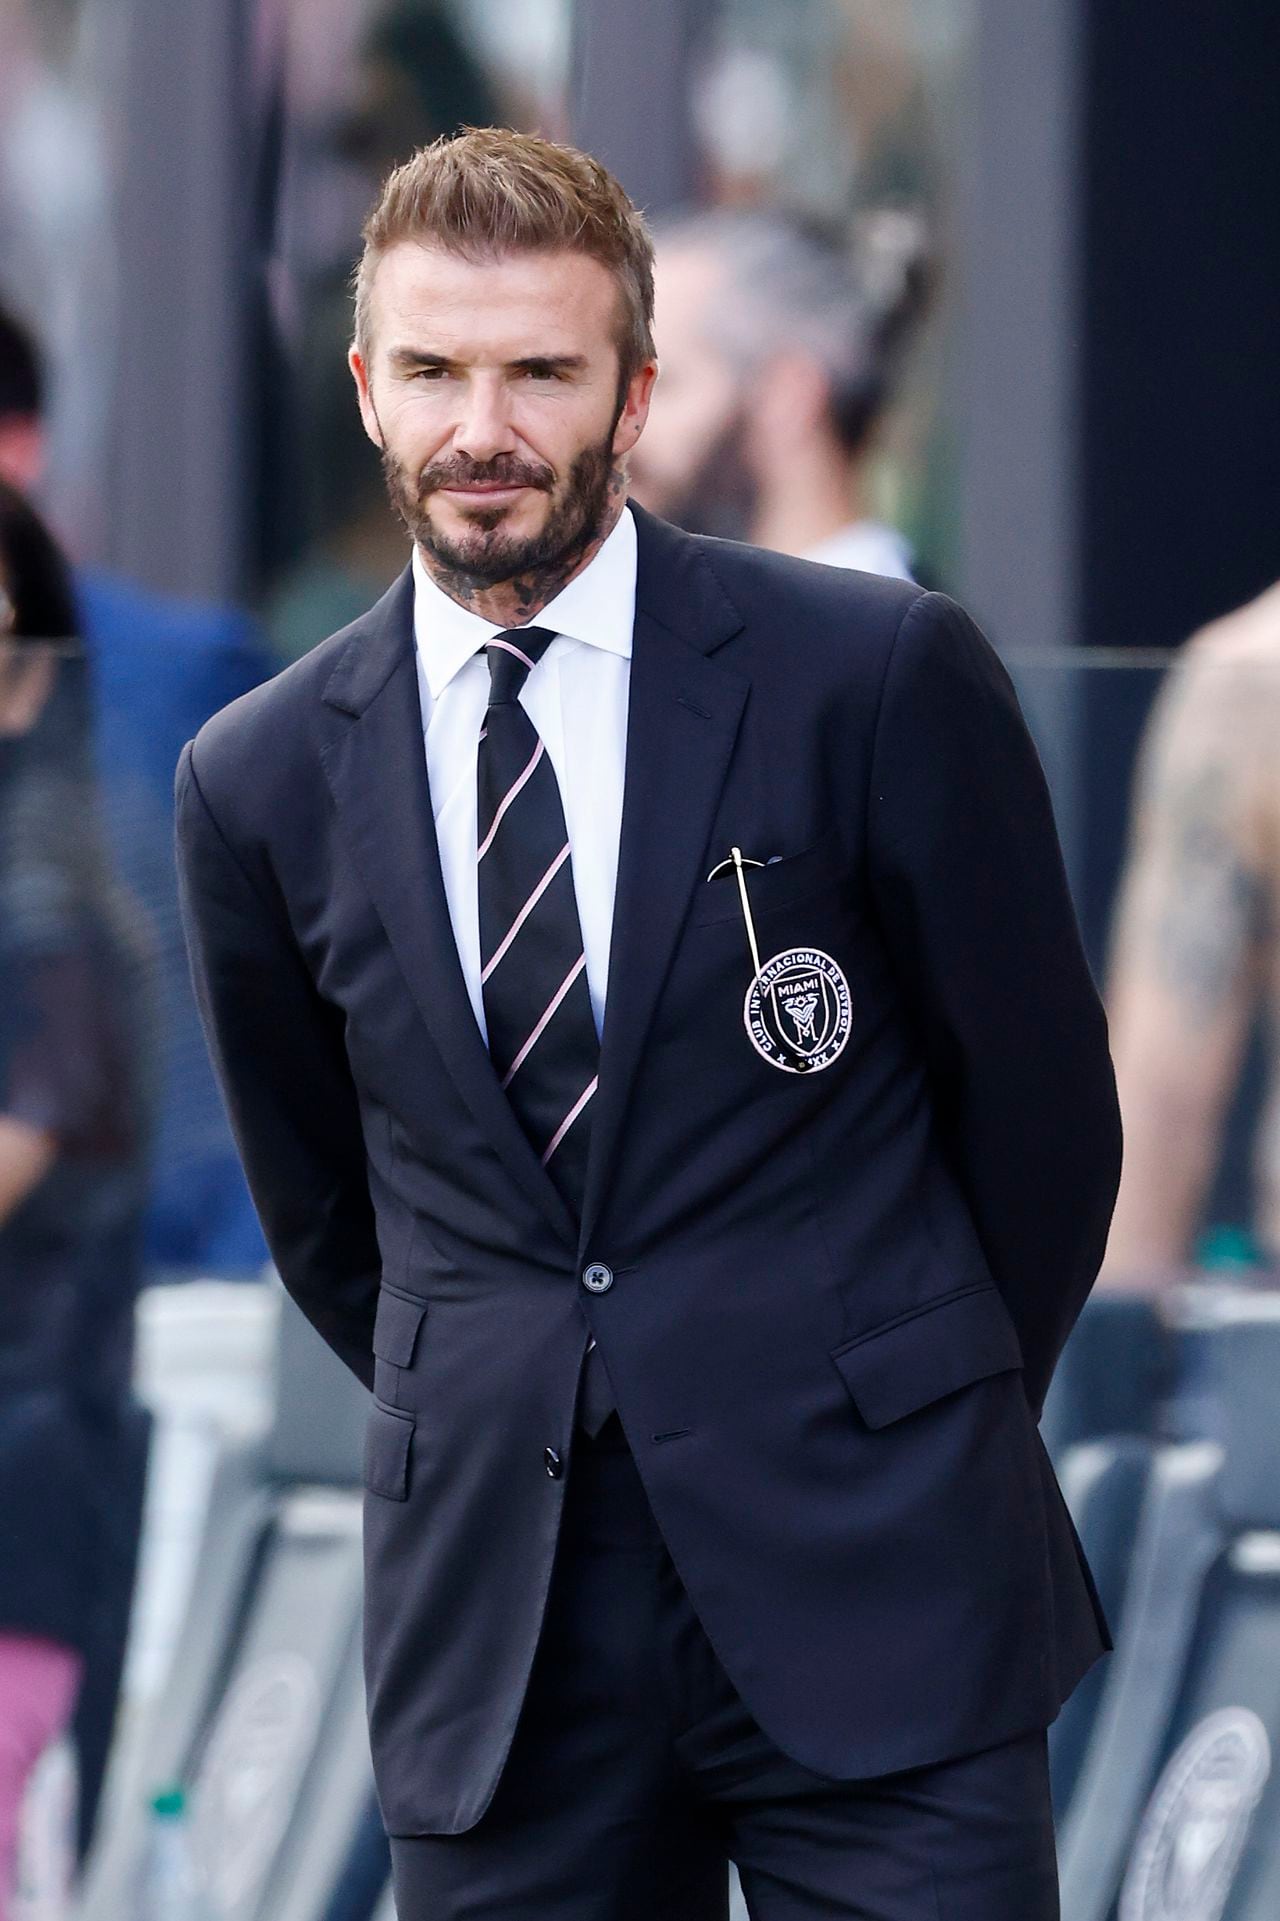 FORT LAUDERDALE, FLORIDA - OCTOBER 30: Owner David Beckham of Inter Miami CF looks on after the game between Inter Miami CF and New York City FC at DRV PNK Stadium on October 30, 2021 in Fort Lauderdale, Florida. (Photo by Michael Reaves/Getty Images)